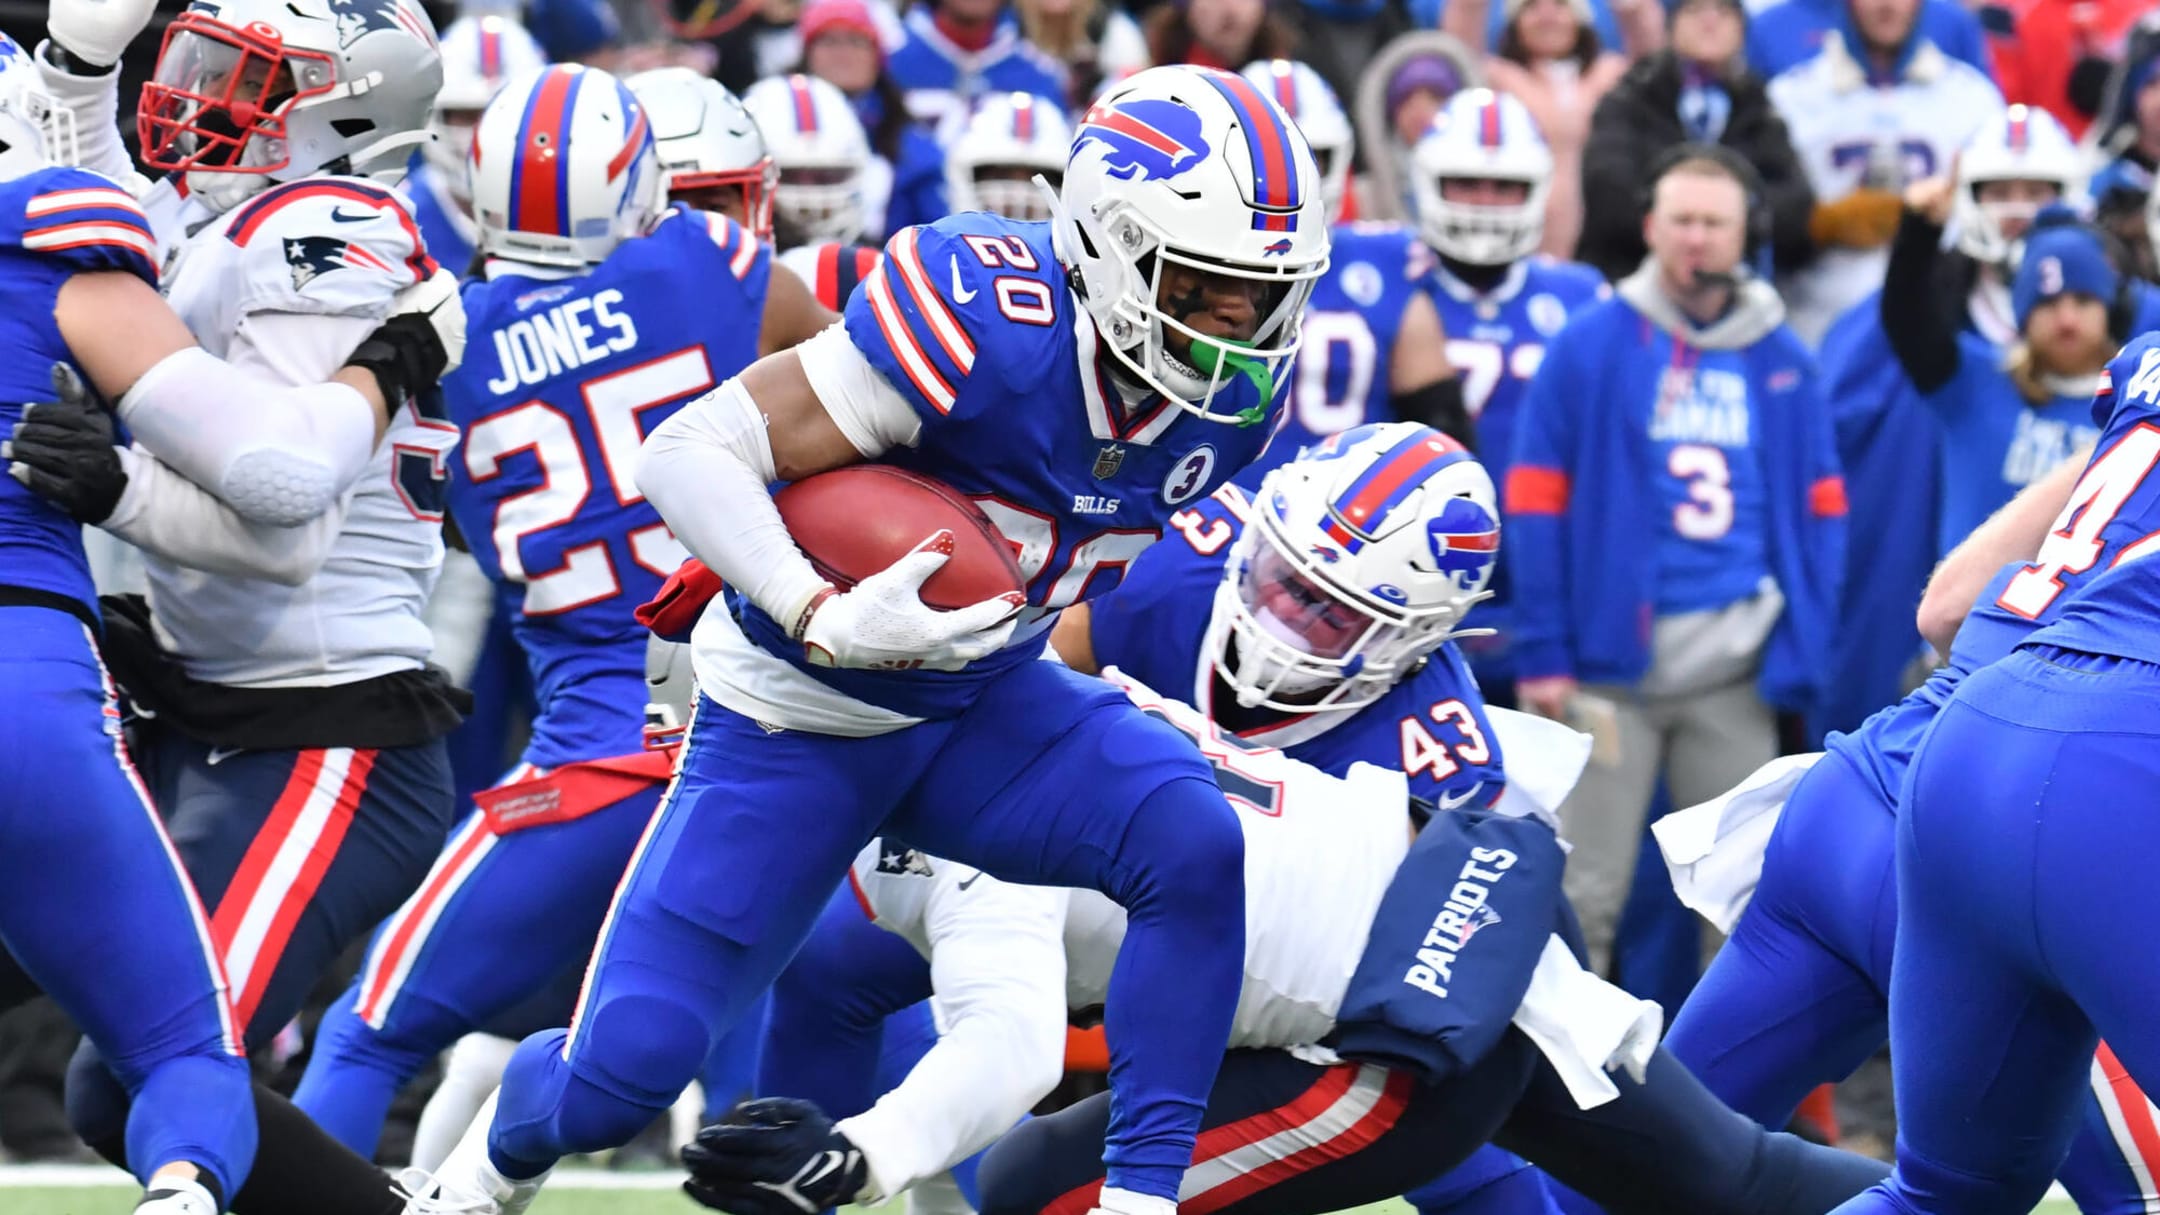 What experts are predicting for Sunday's Patriots-Bills game